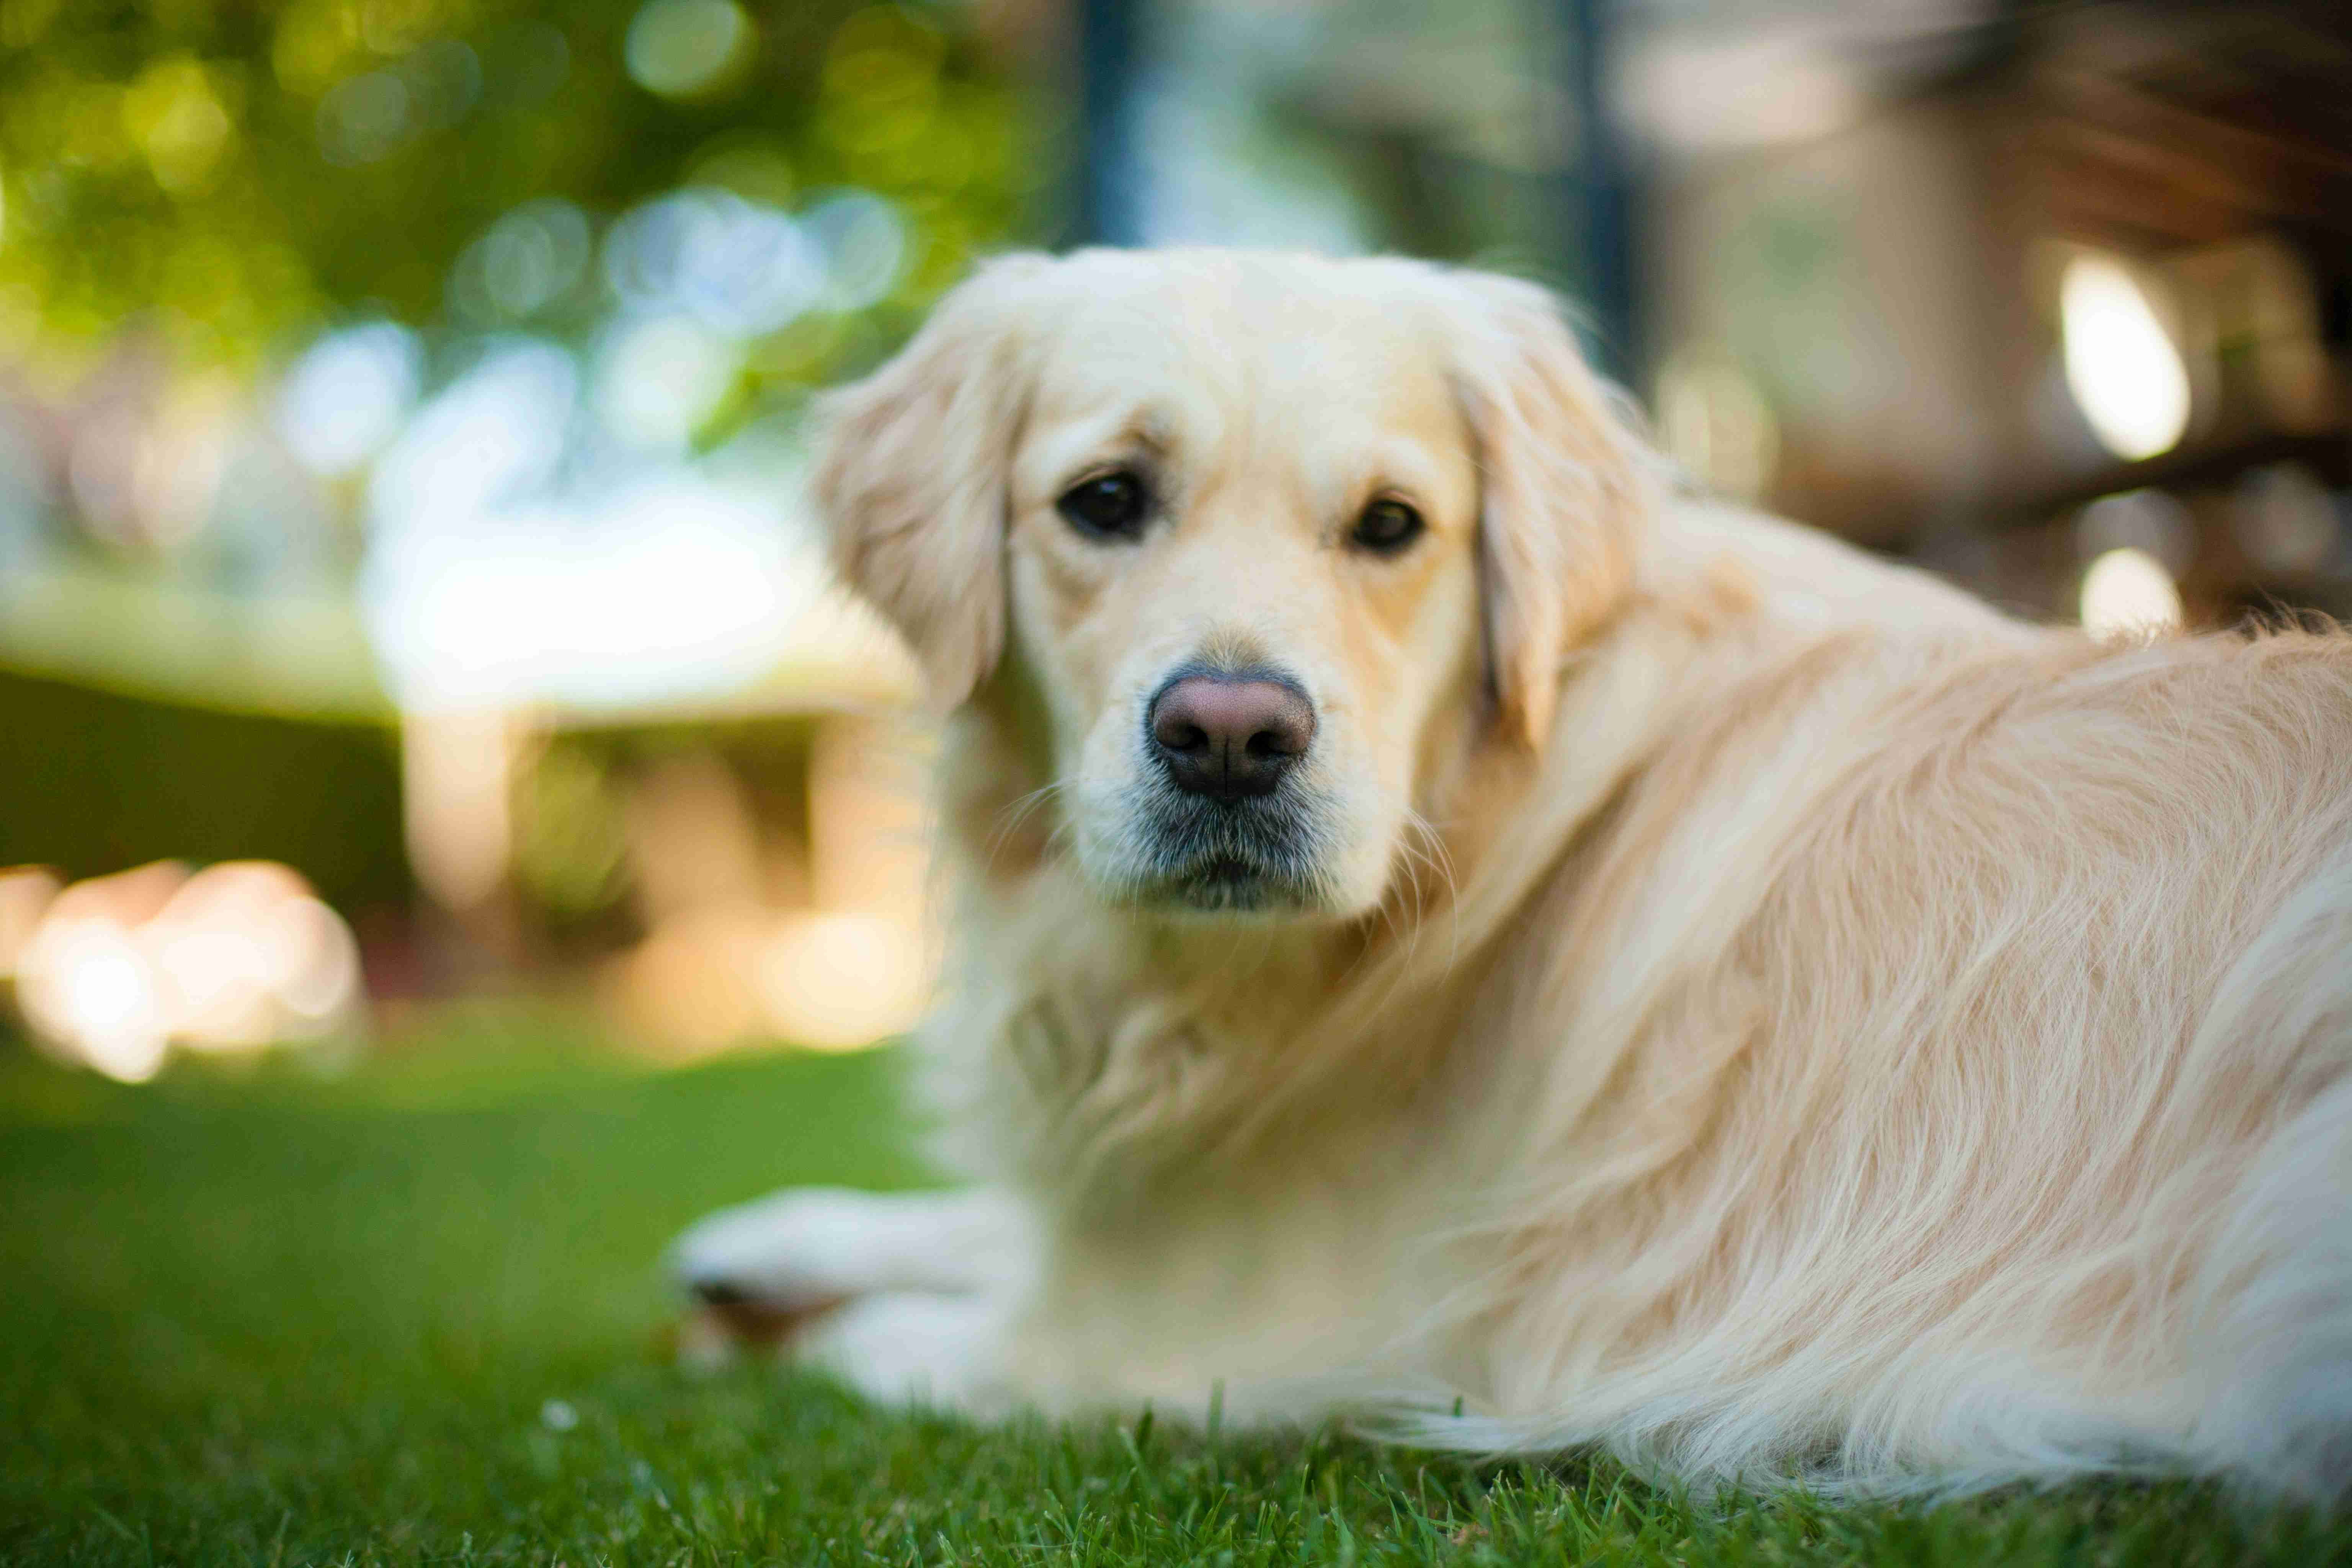 Are golden retrievers prone to any specific heart conditions?